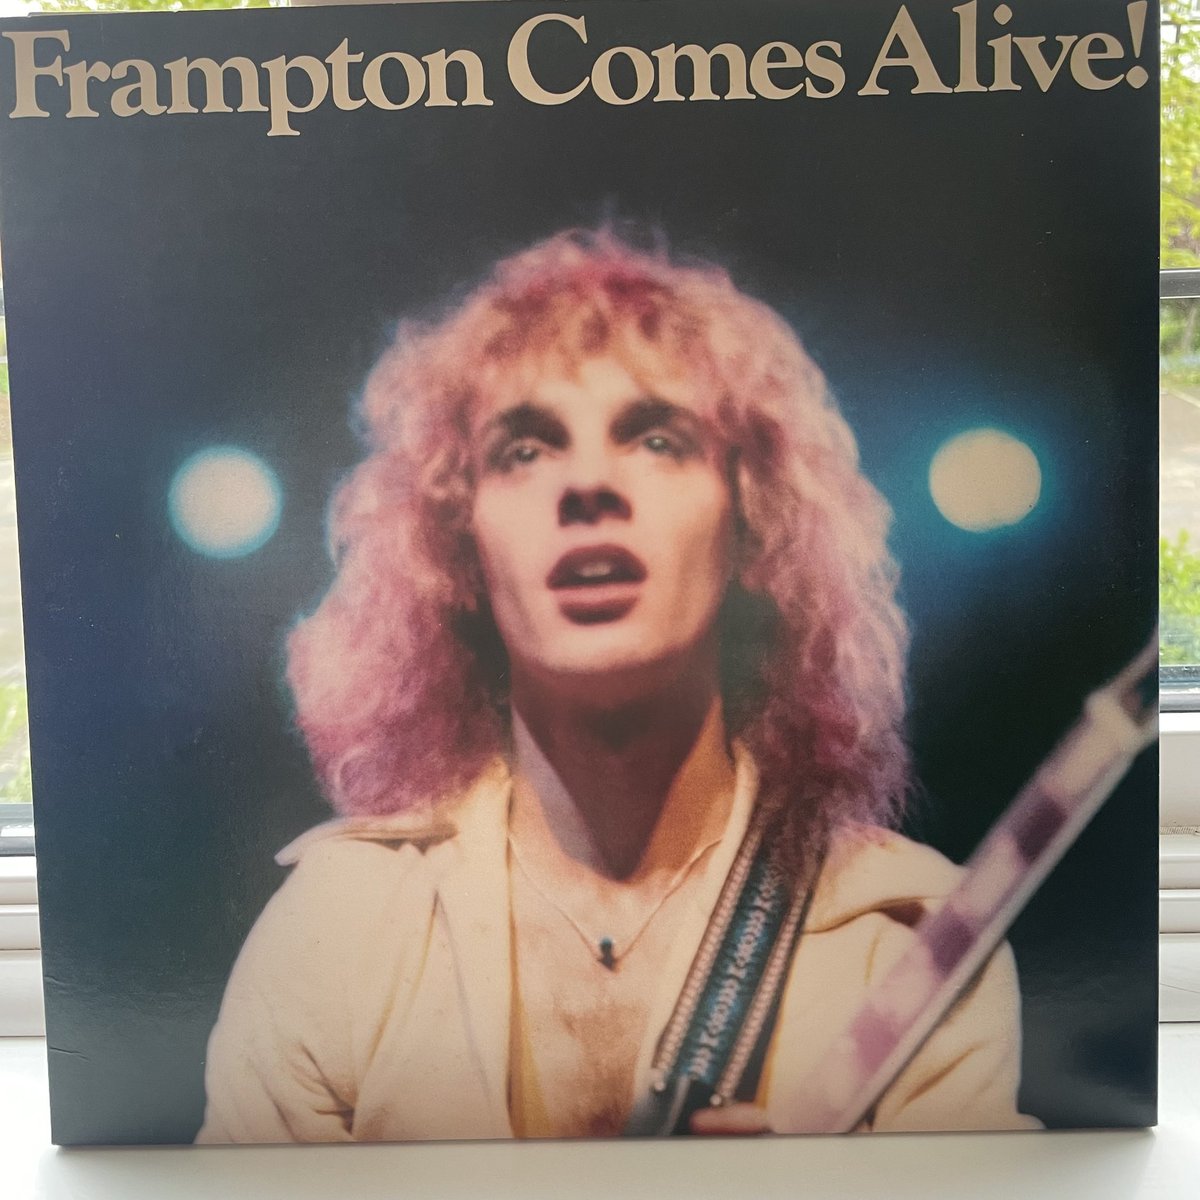 Tunes for a Friday night 😊 #PeterFrampton